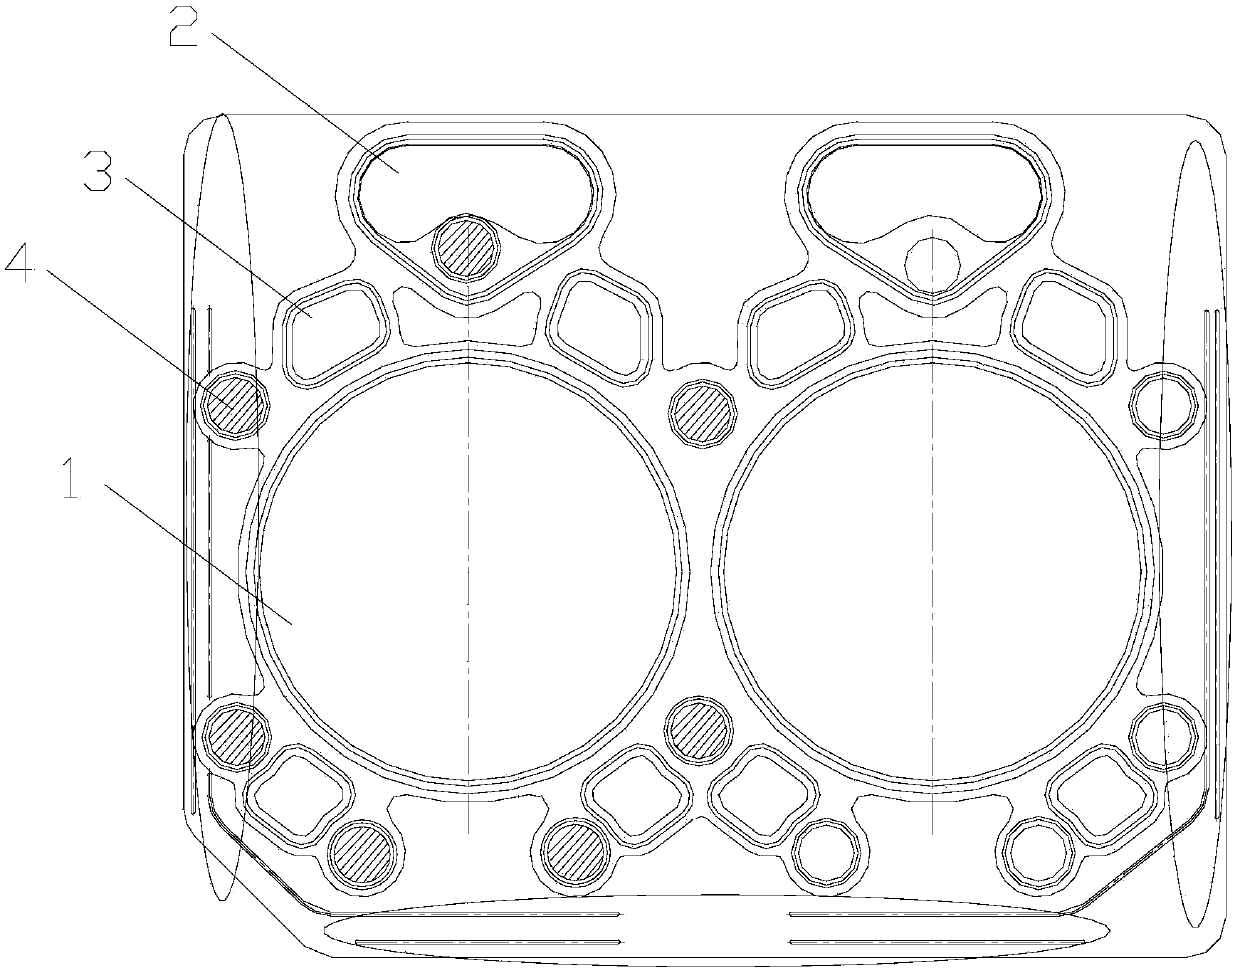 Gasket for solving cylinder cover sealing failure and estimating method of tightness of gasket